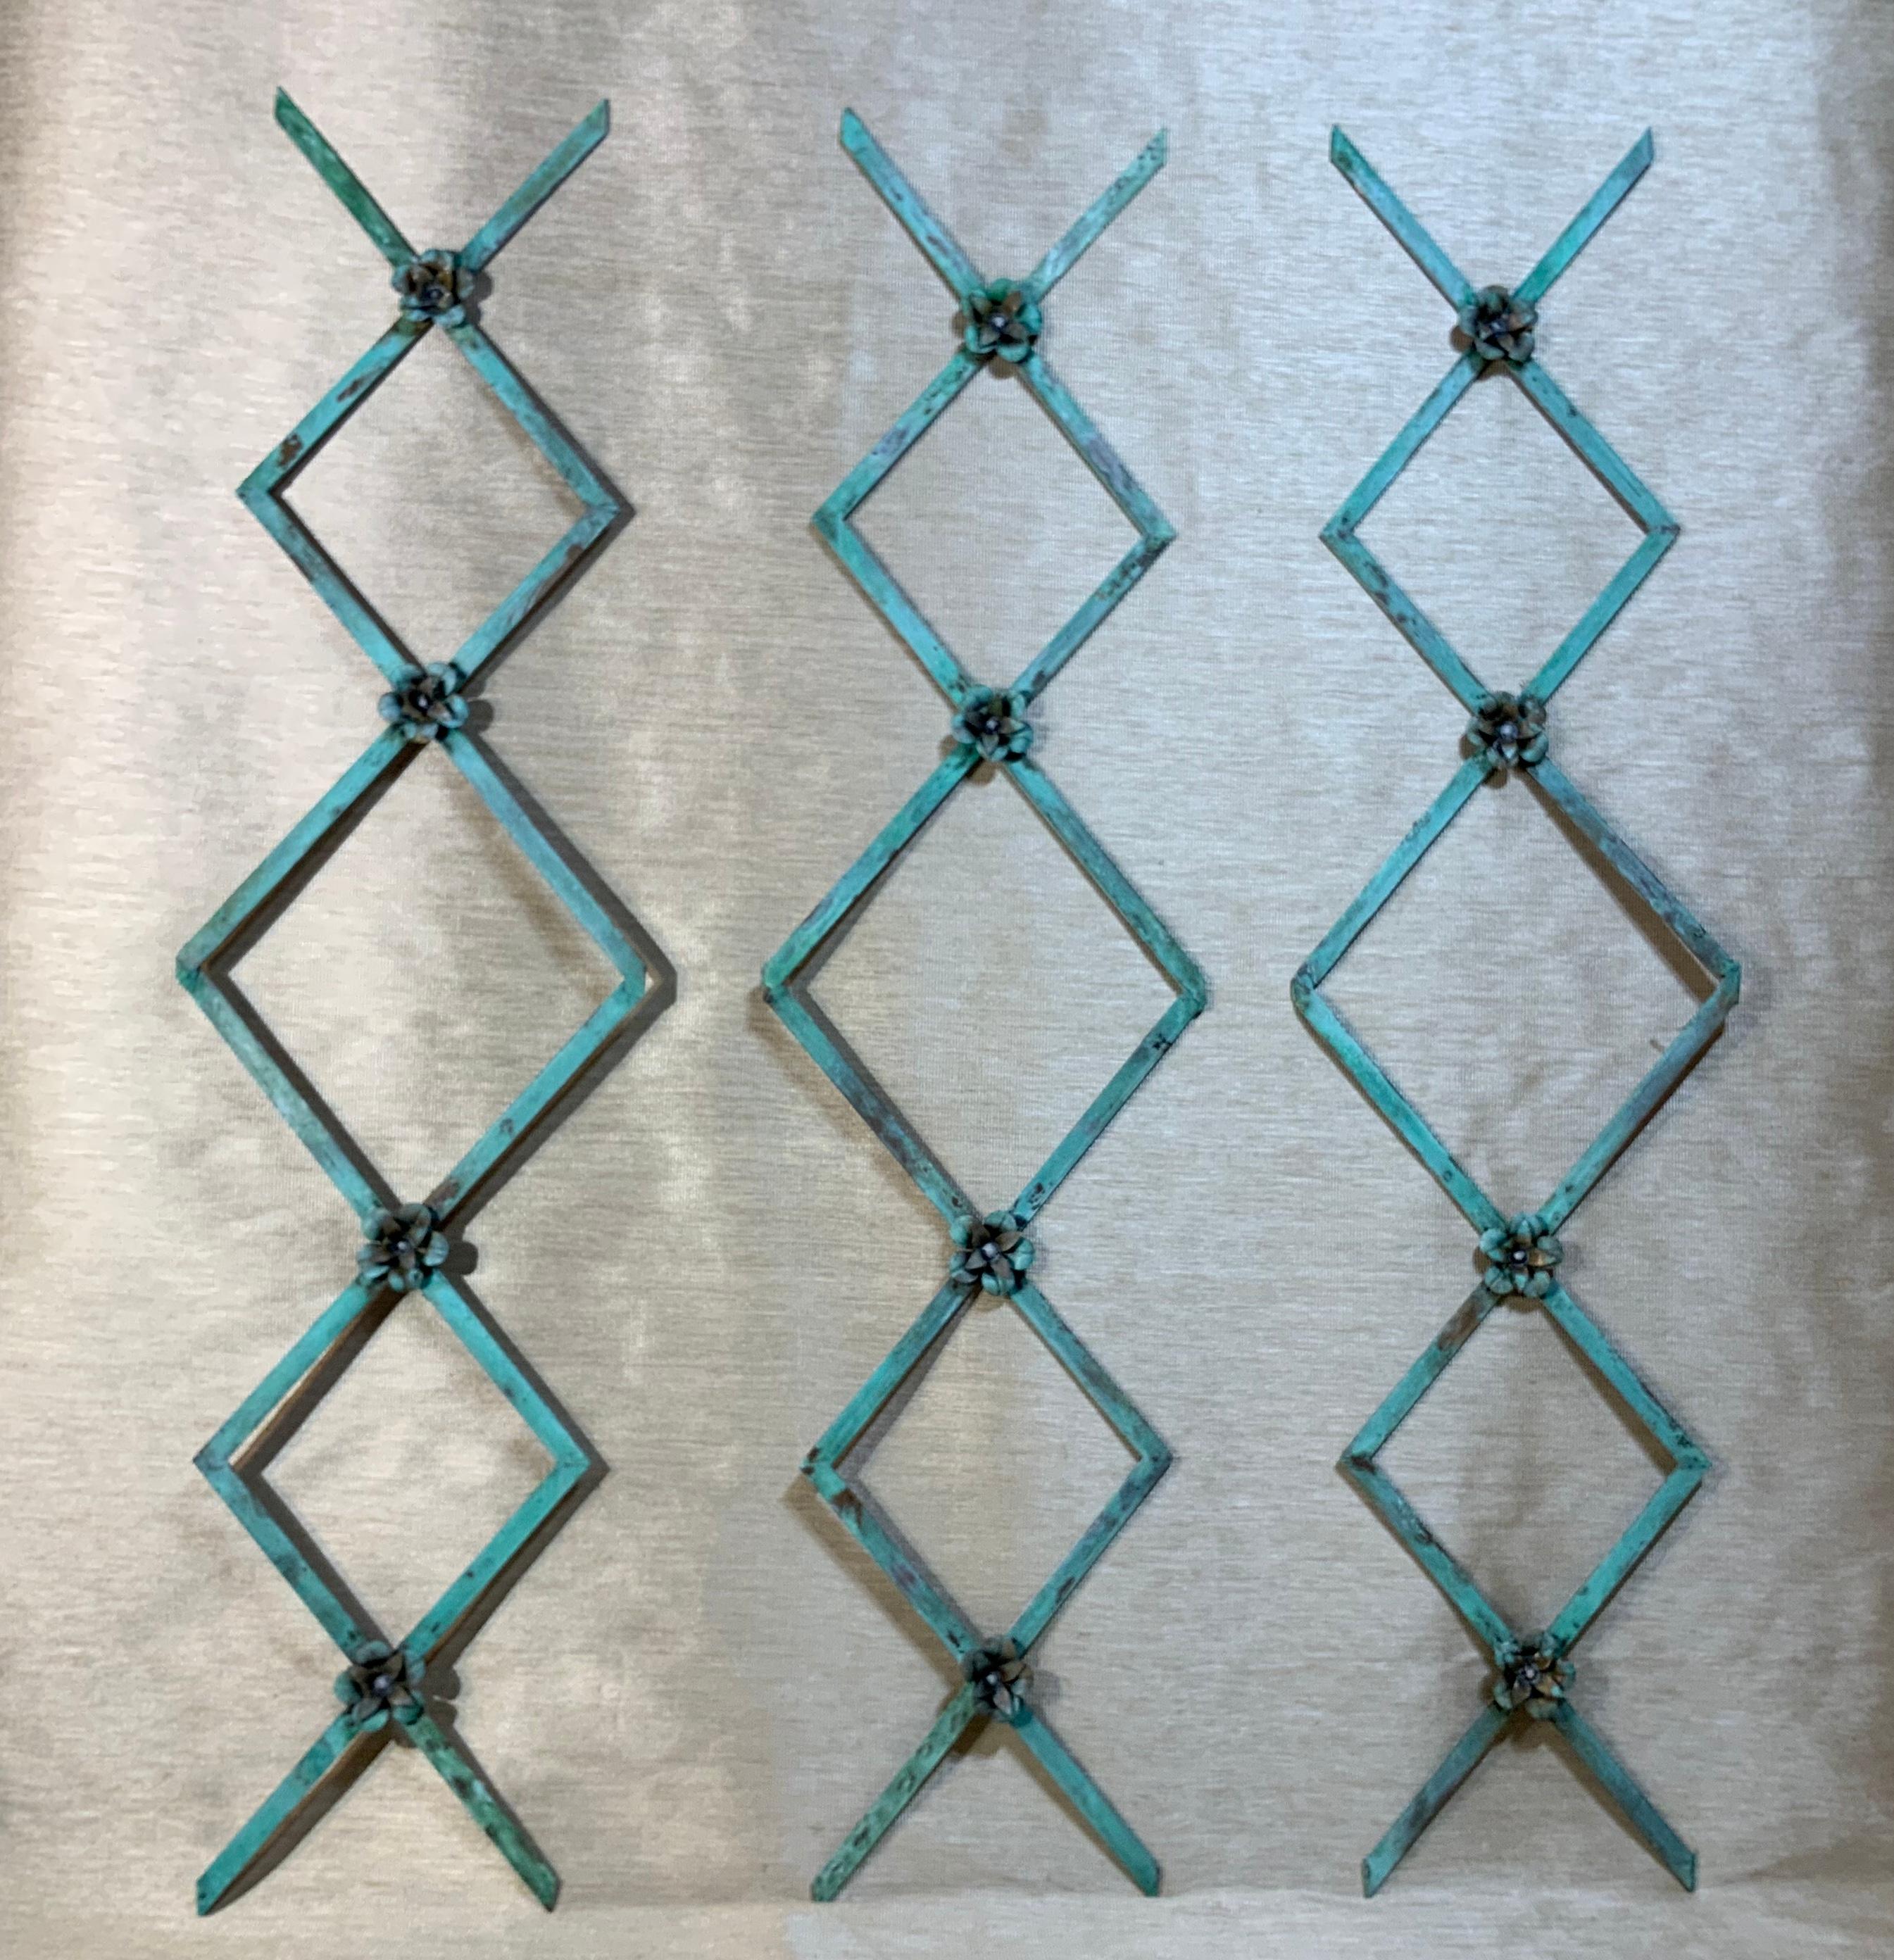 Elegant wall hanging ornaments made of solid brass, originally part of 19th century screen salvage. Exquisite verdigris patina, light, will make exceptional decorative wall hanging, three pieces only.
The size: 34” x 8”.75 x 0.25 each panel.